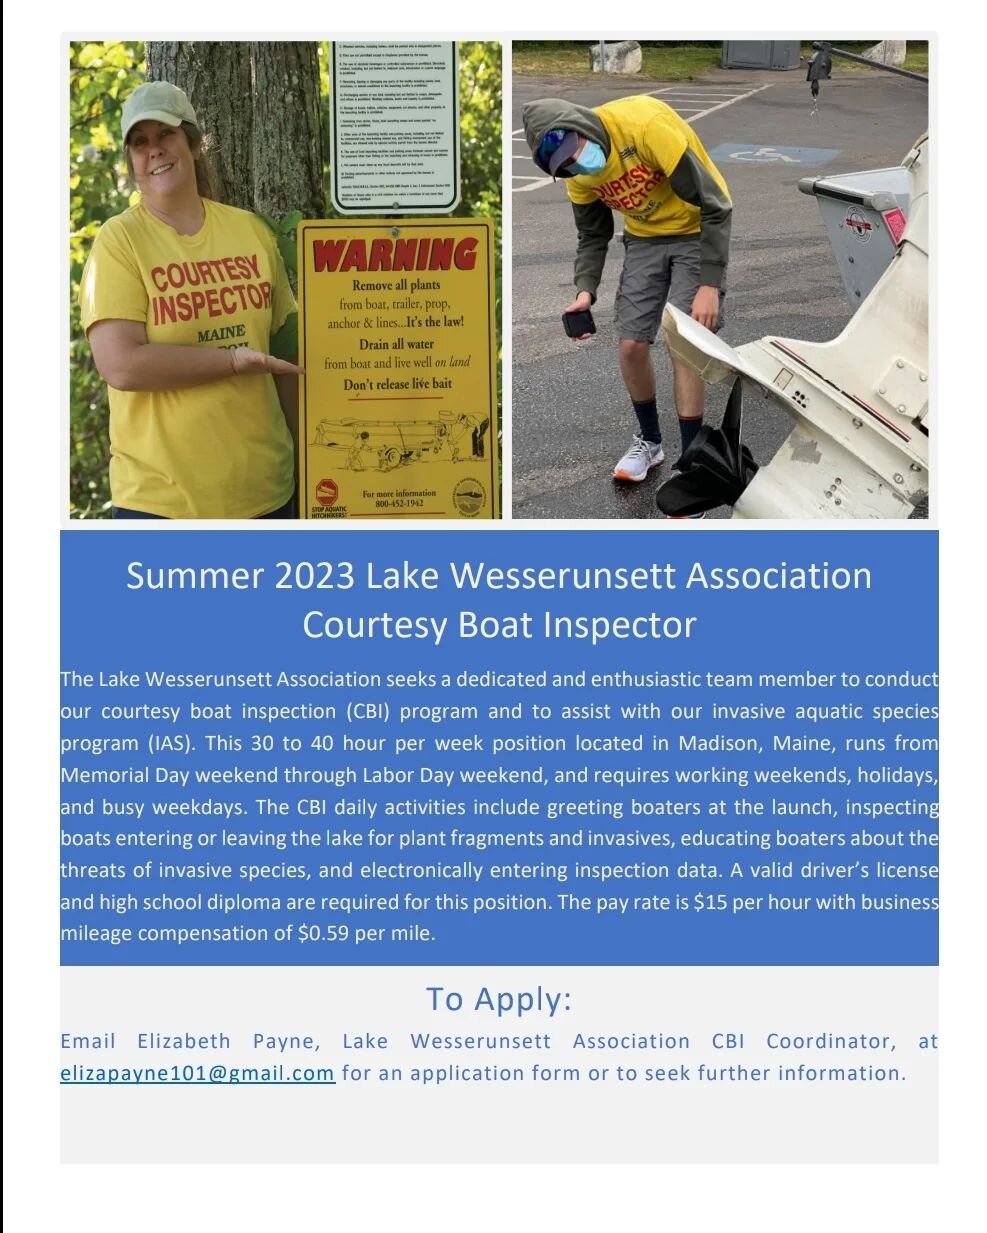 For more information 800-452-1942

Summer 2023 Lake Wesserunsett Association Courtesy Boat Inspector

The Lake Wesserunsett Association seeks a dedicated and enthusiastic team member to conduct our courtesy boat inspection (CBI) program and to assist